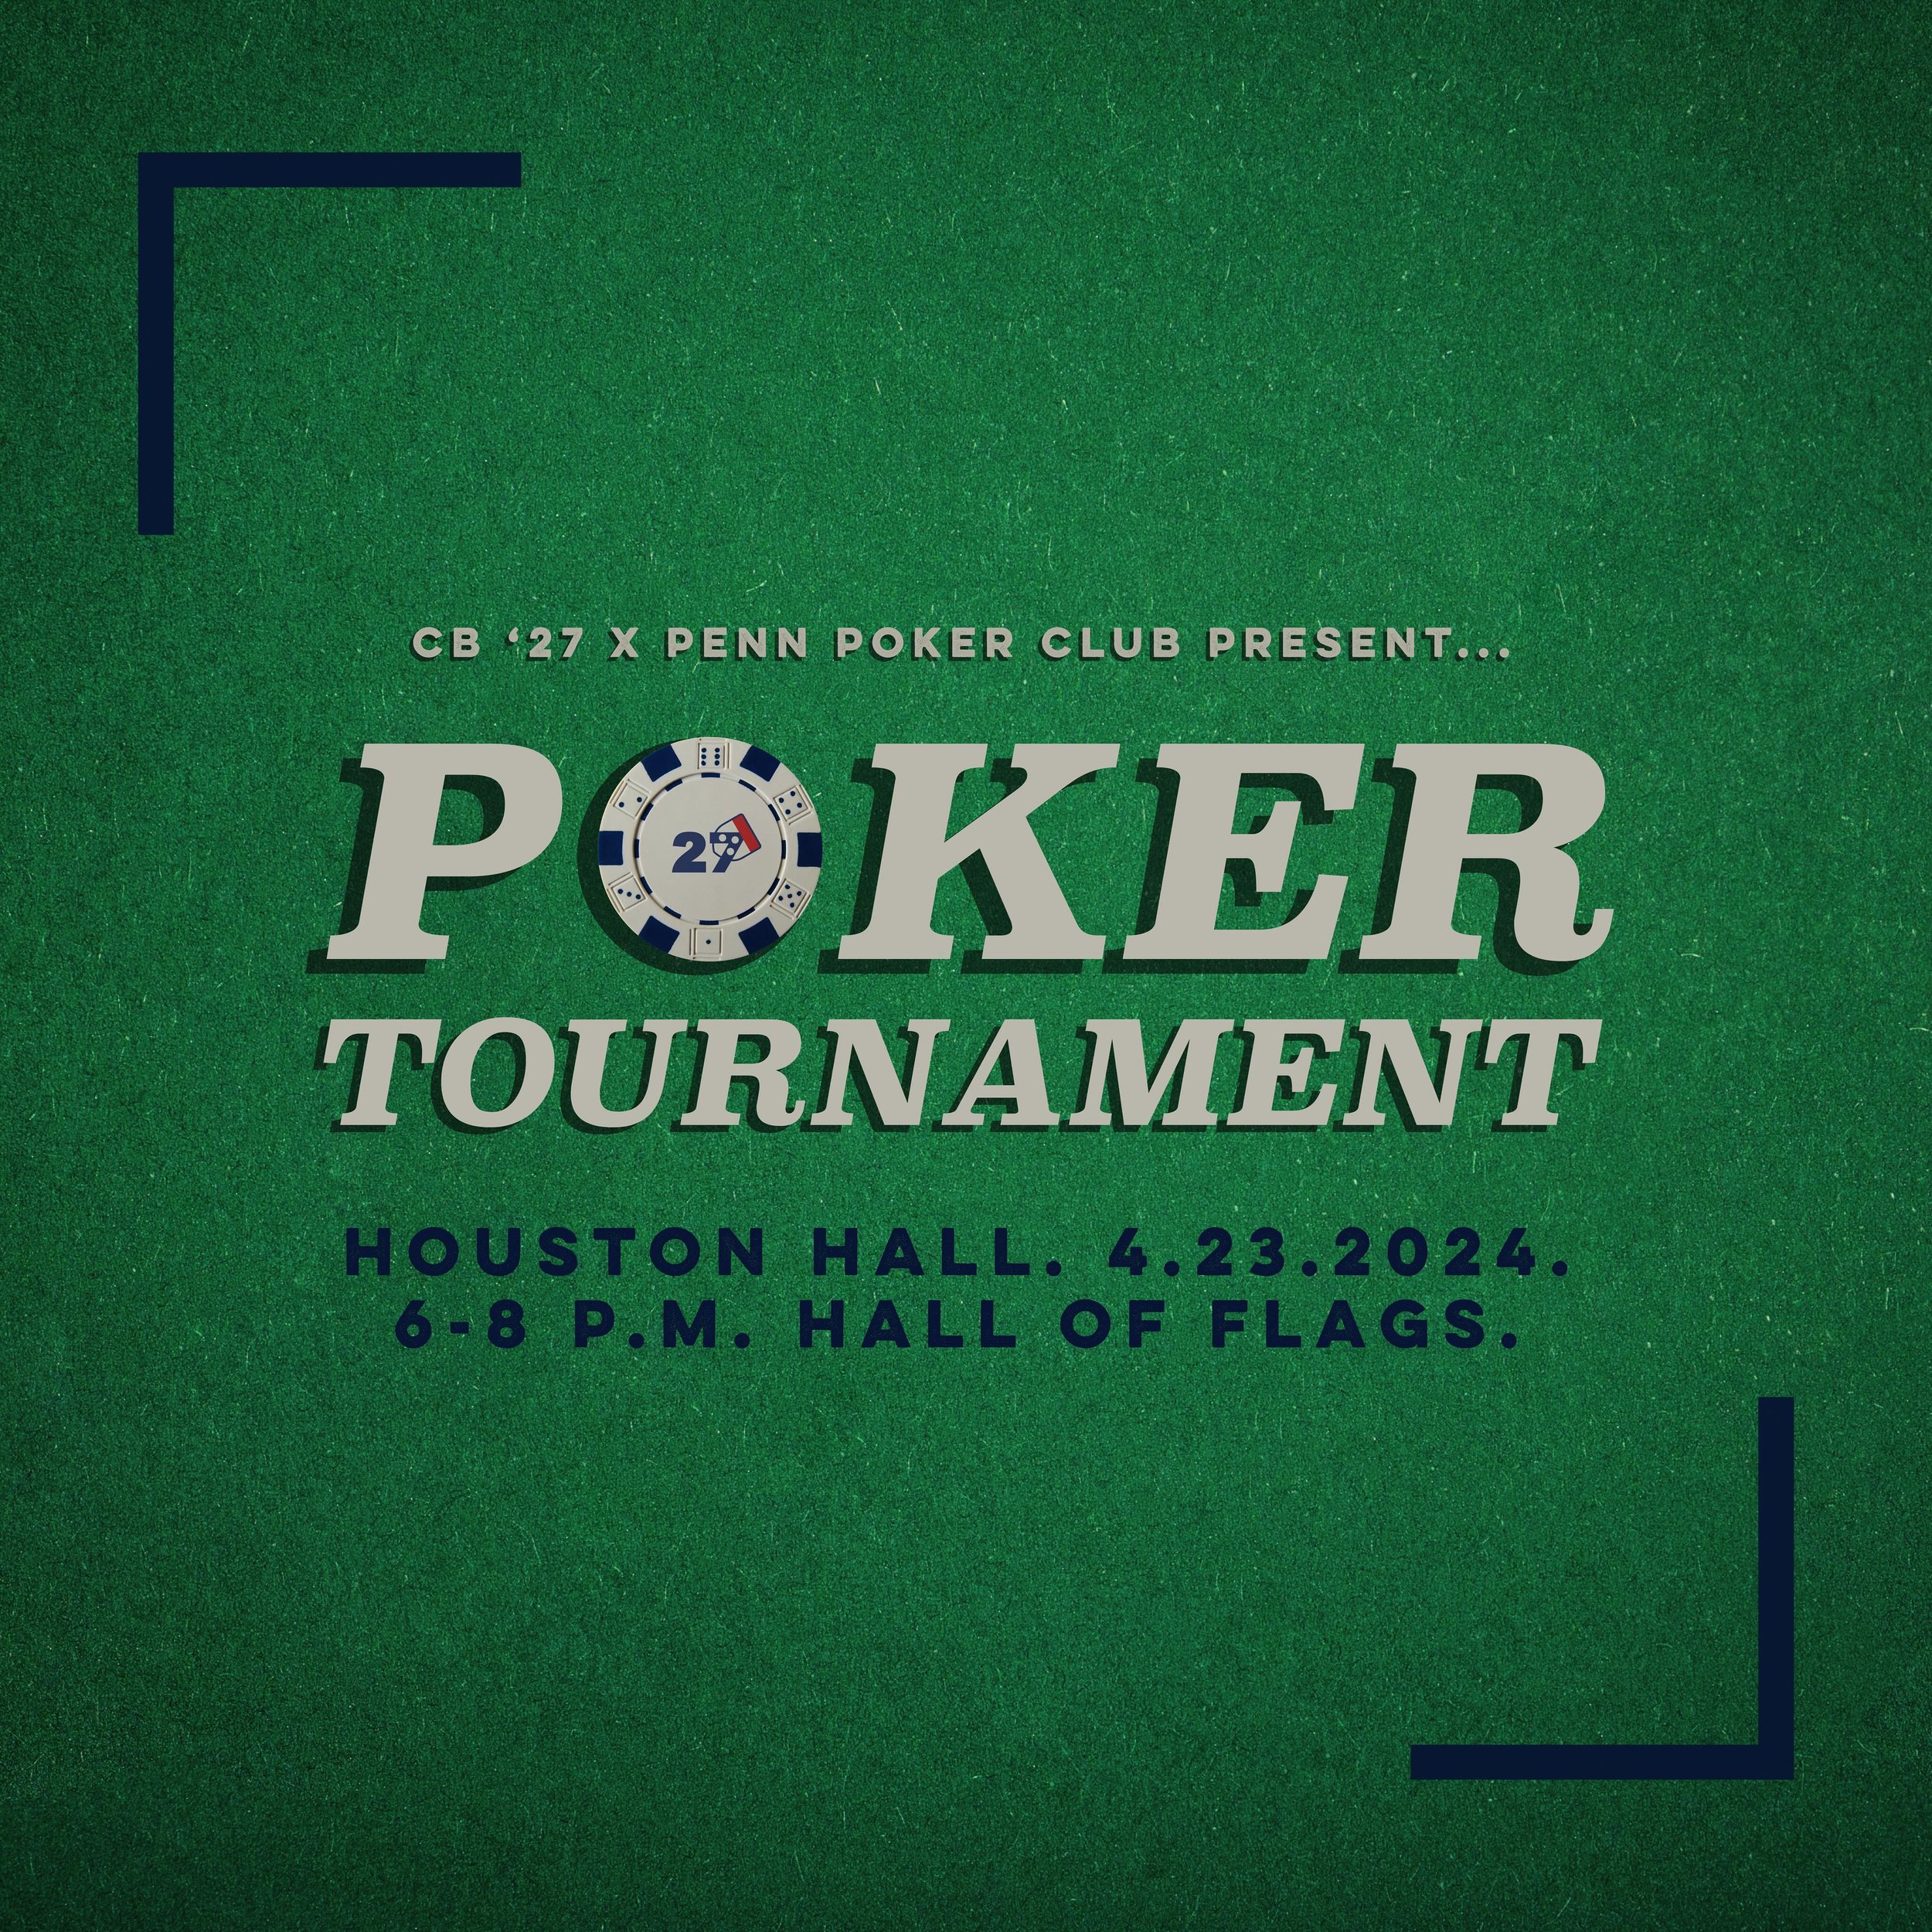 &spades;️ &hearts;️ POKER TOURNAMENT &diams;️&clubs;️

Reminder for those of you who have registered to go all in with us tonight, April 23rd, from 6 - 8 p.m. at the Hall of Flags. Compete with ZERO stakes for the chance to win prizes such as JBL spe